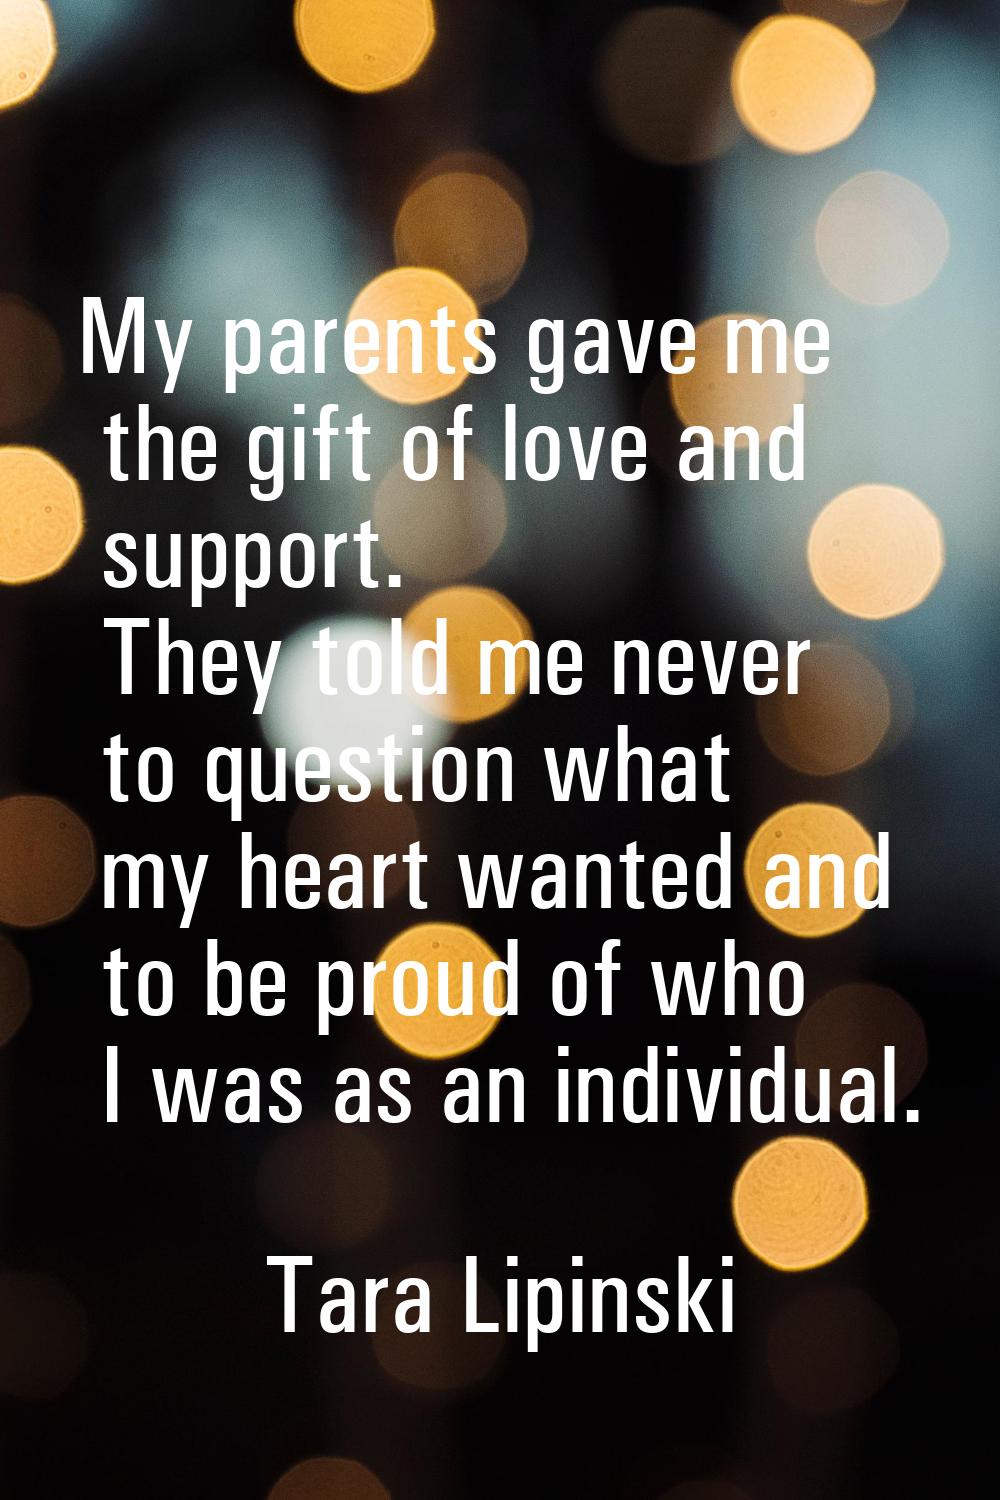 My parents gave me the gift of love and support. They told me never to question what my heart wante